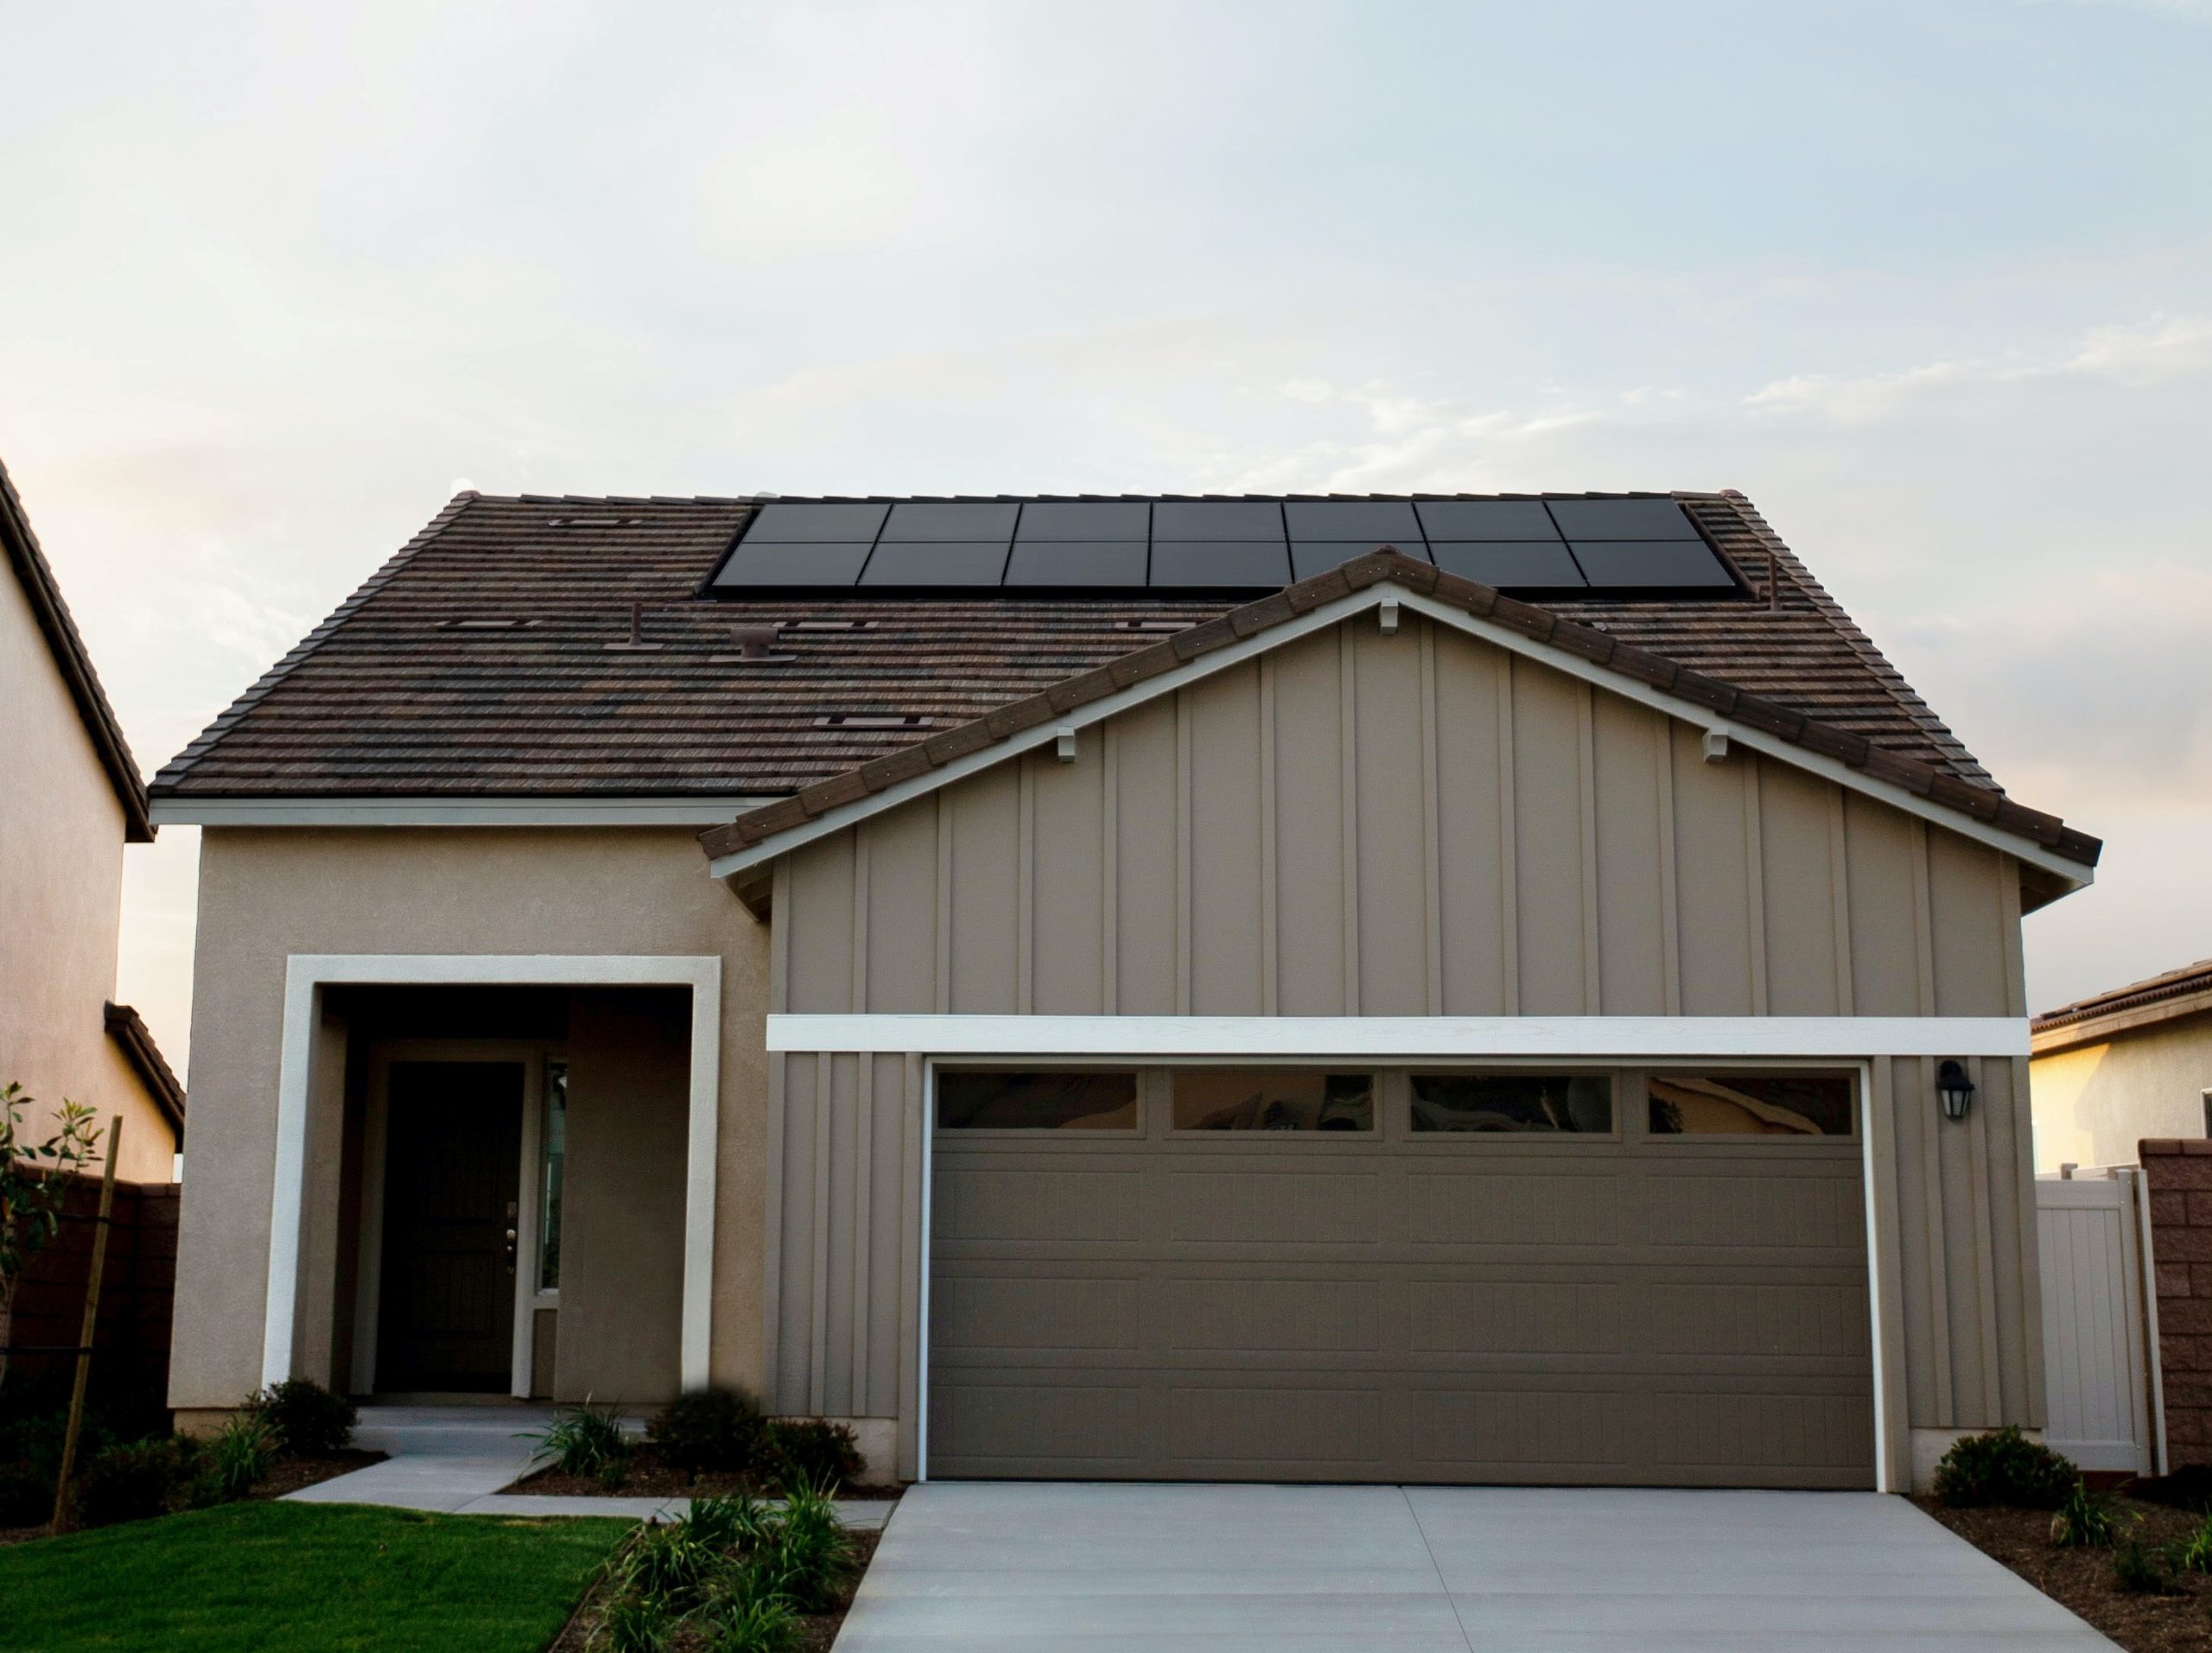 California suburban home with solar panels on roof; sunset in the background.